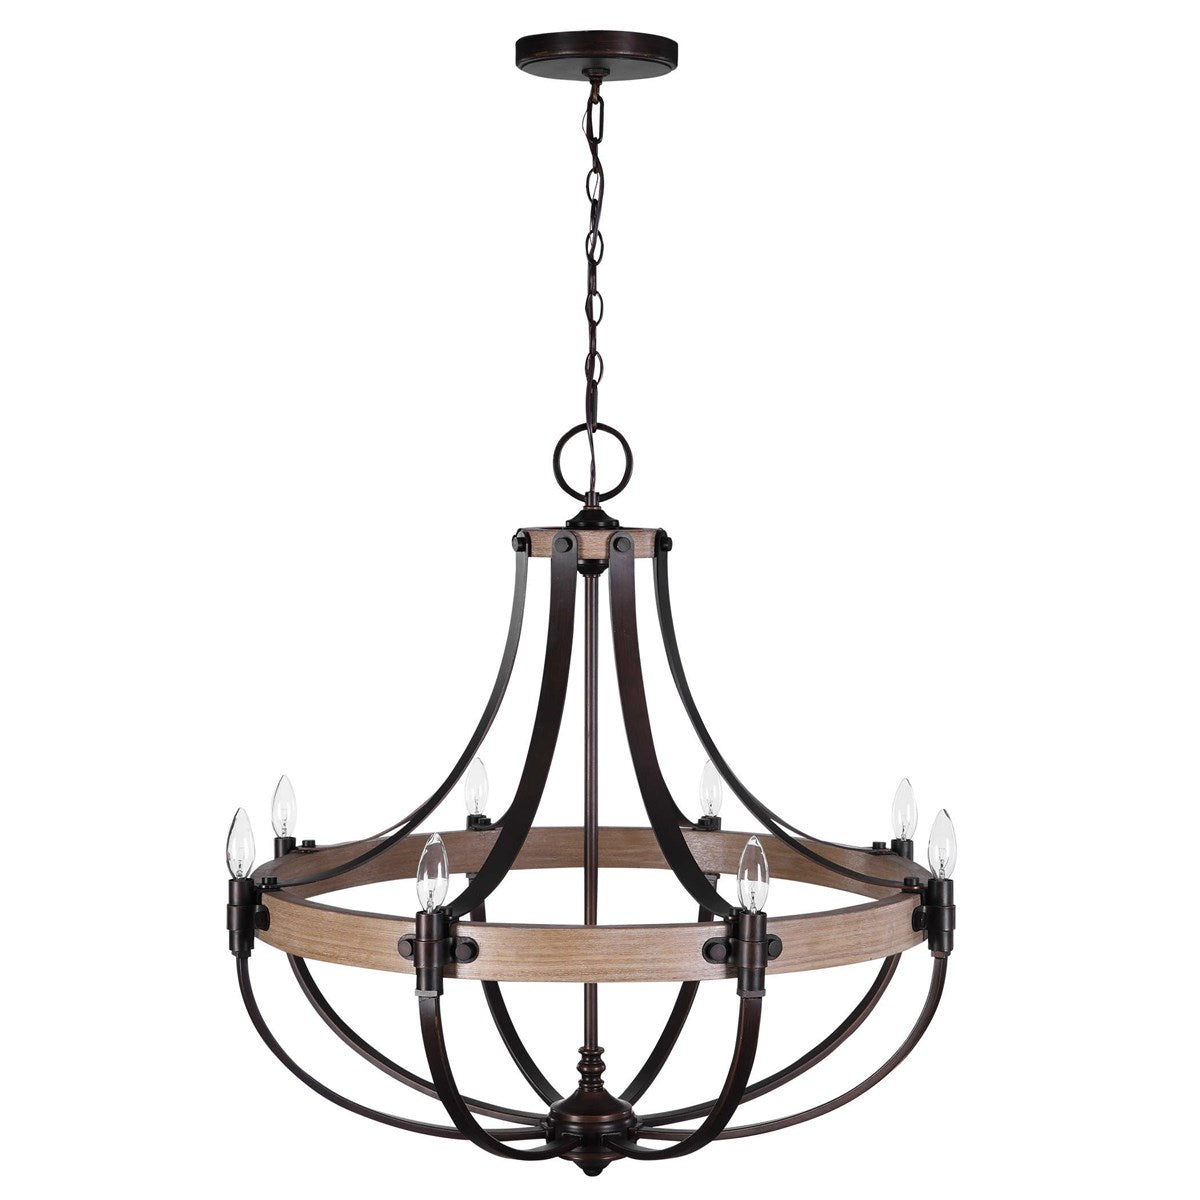 Angle View. Updated Empire Shaped 8 Lt. Chandelier With A French Influence, Featuring A Ring Of Natu